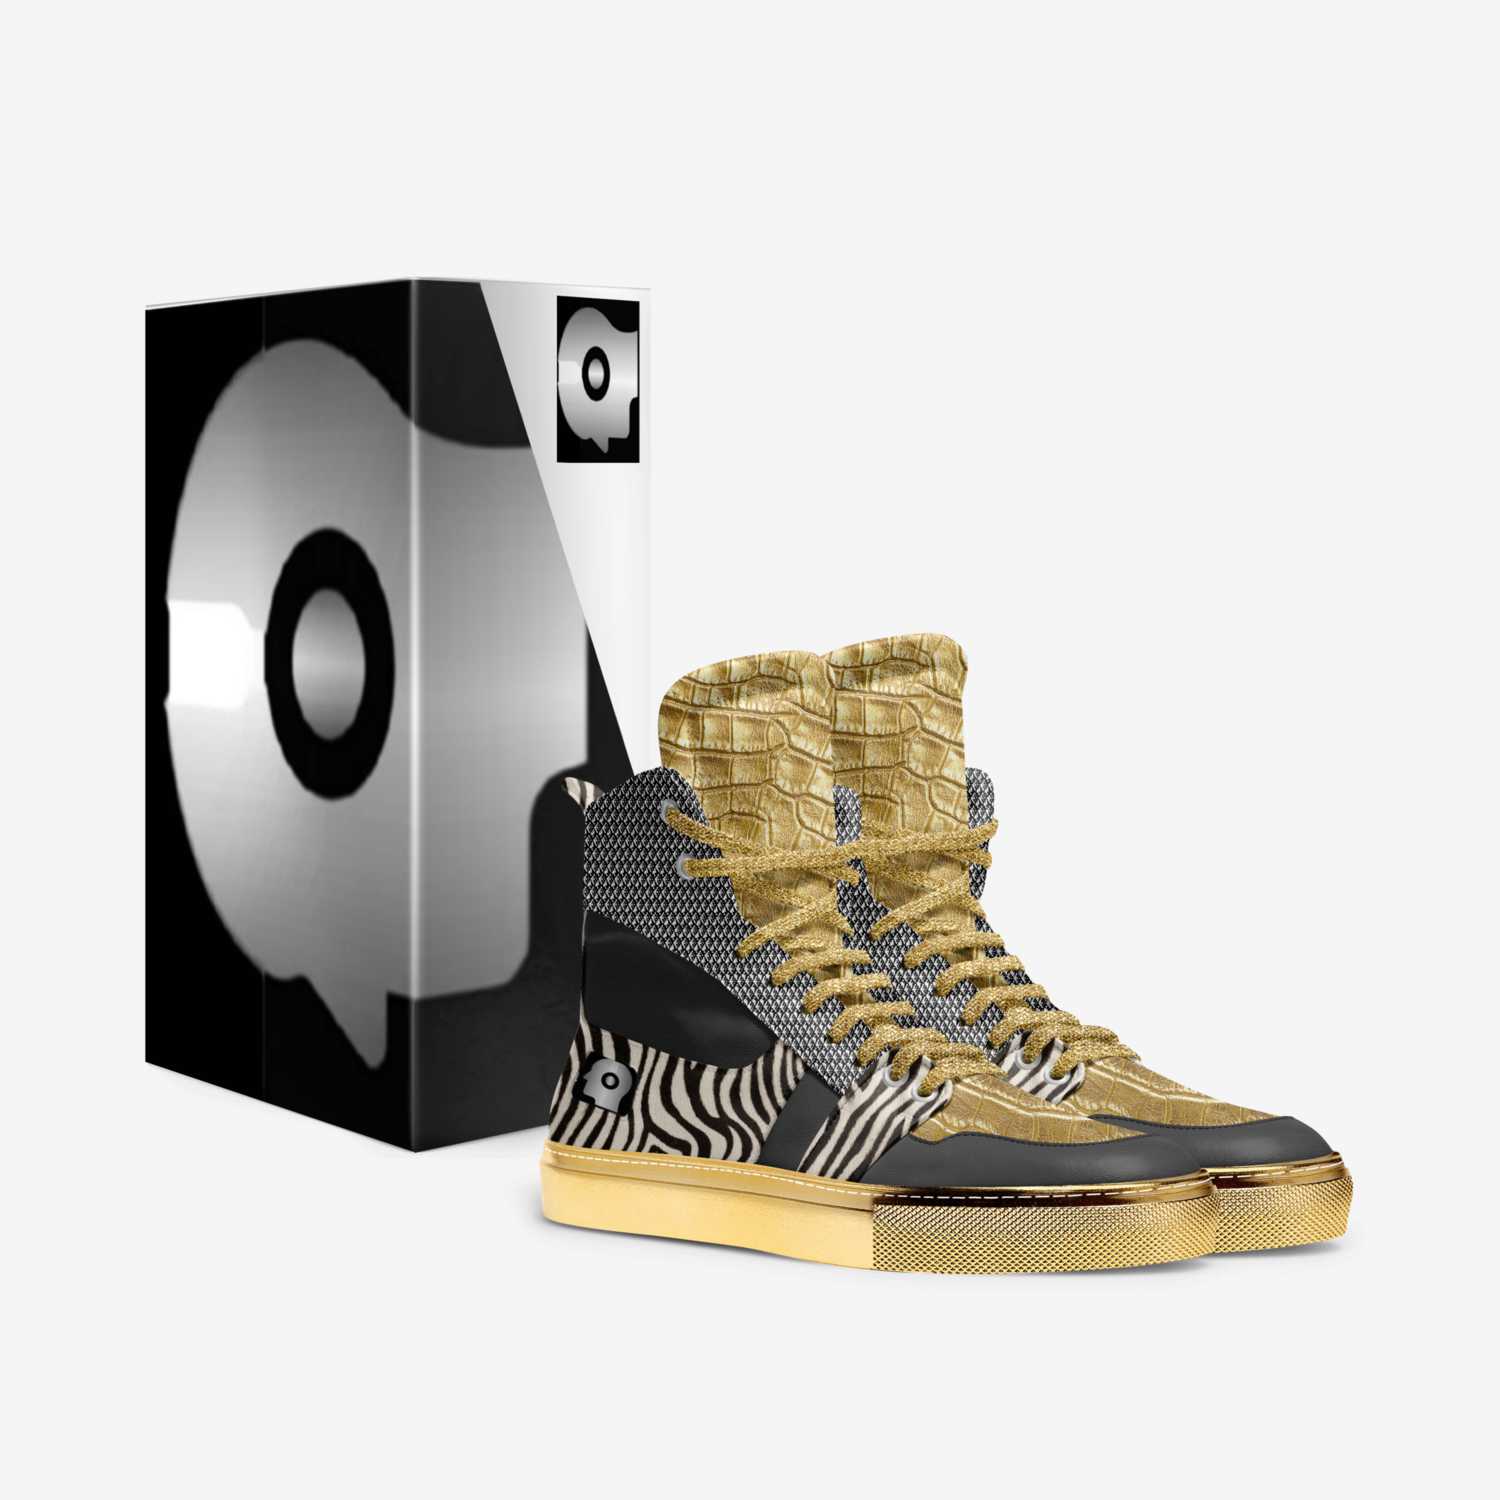 JJ3 Skywalker custom made in Italy shoes by Jock Johnson | Box view